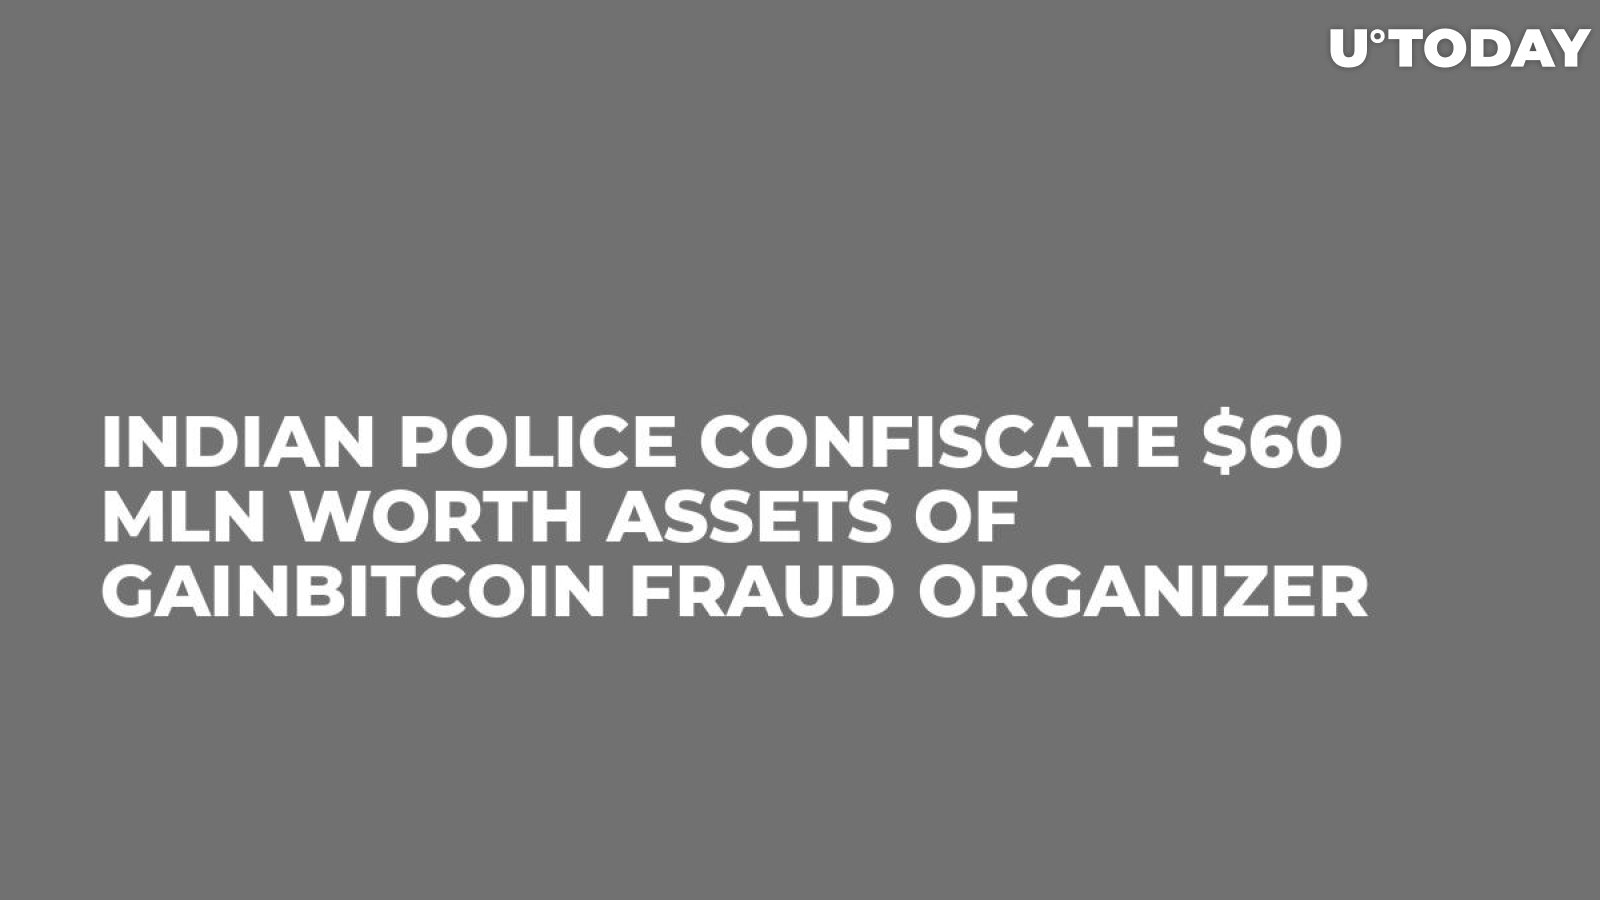 Indian Police Confiscate $60 Mln Worth Assets of GainBitcoin Fraud Organizer